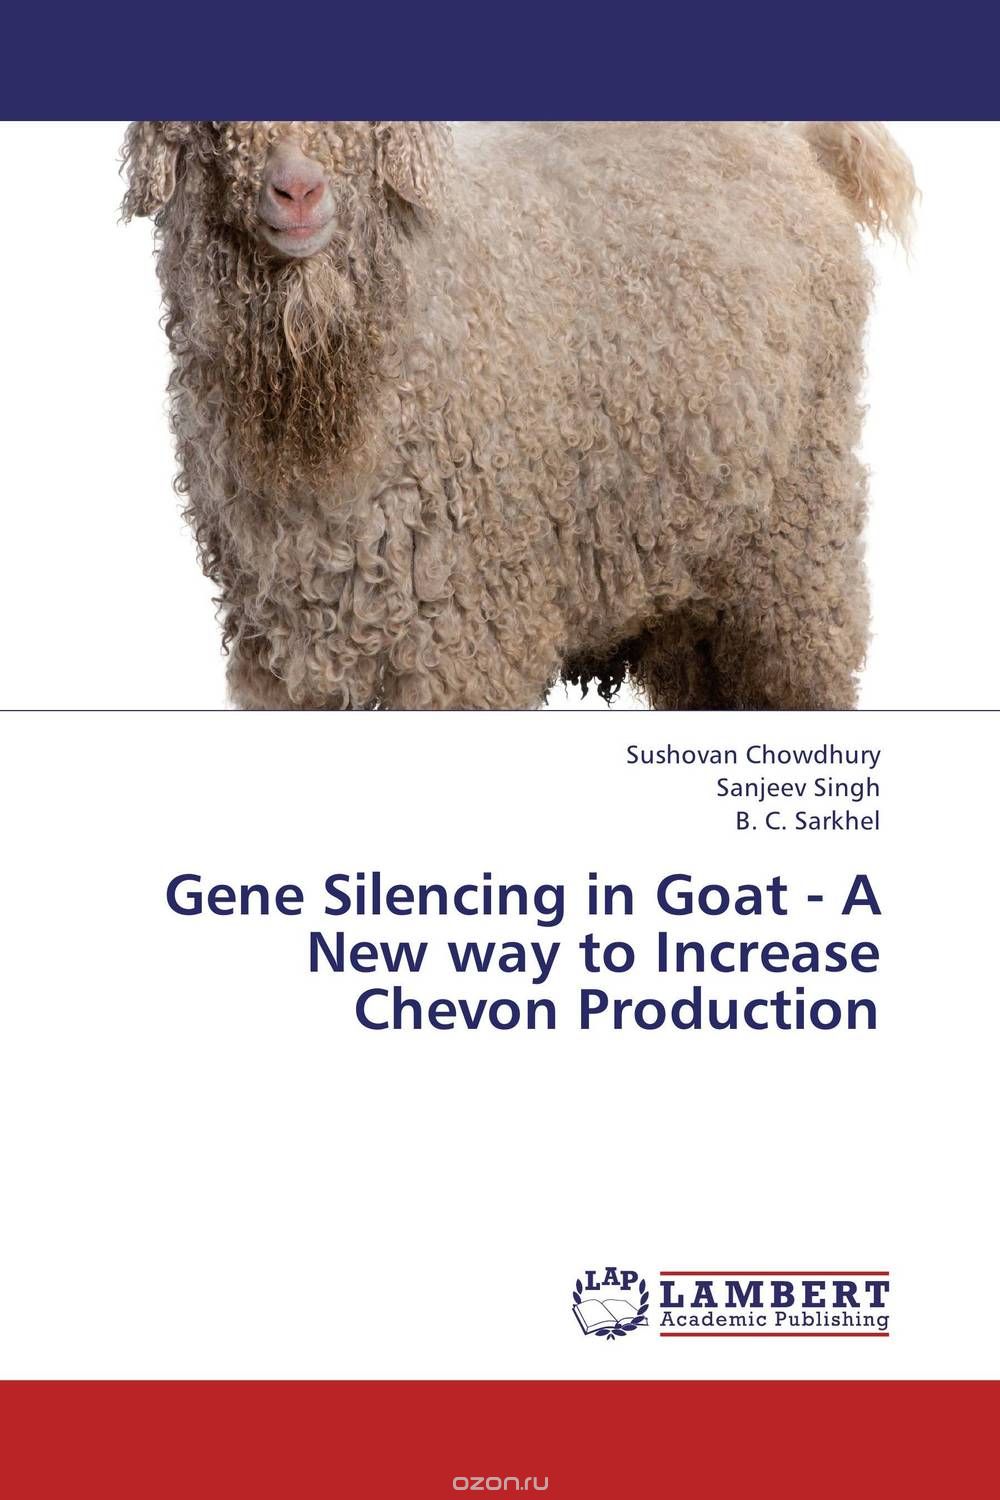 Скачать книгу "Gene Silencing in Goat - A New way to Increase Chevon Production"